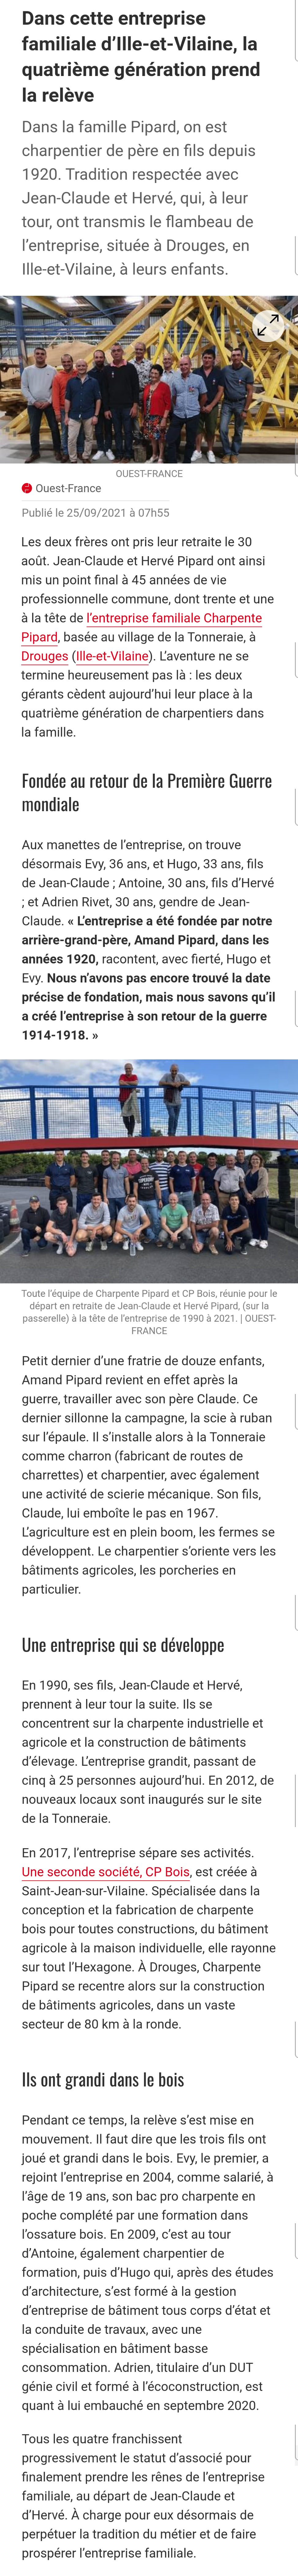 Article Ouest France 25-09-21_version mobile